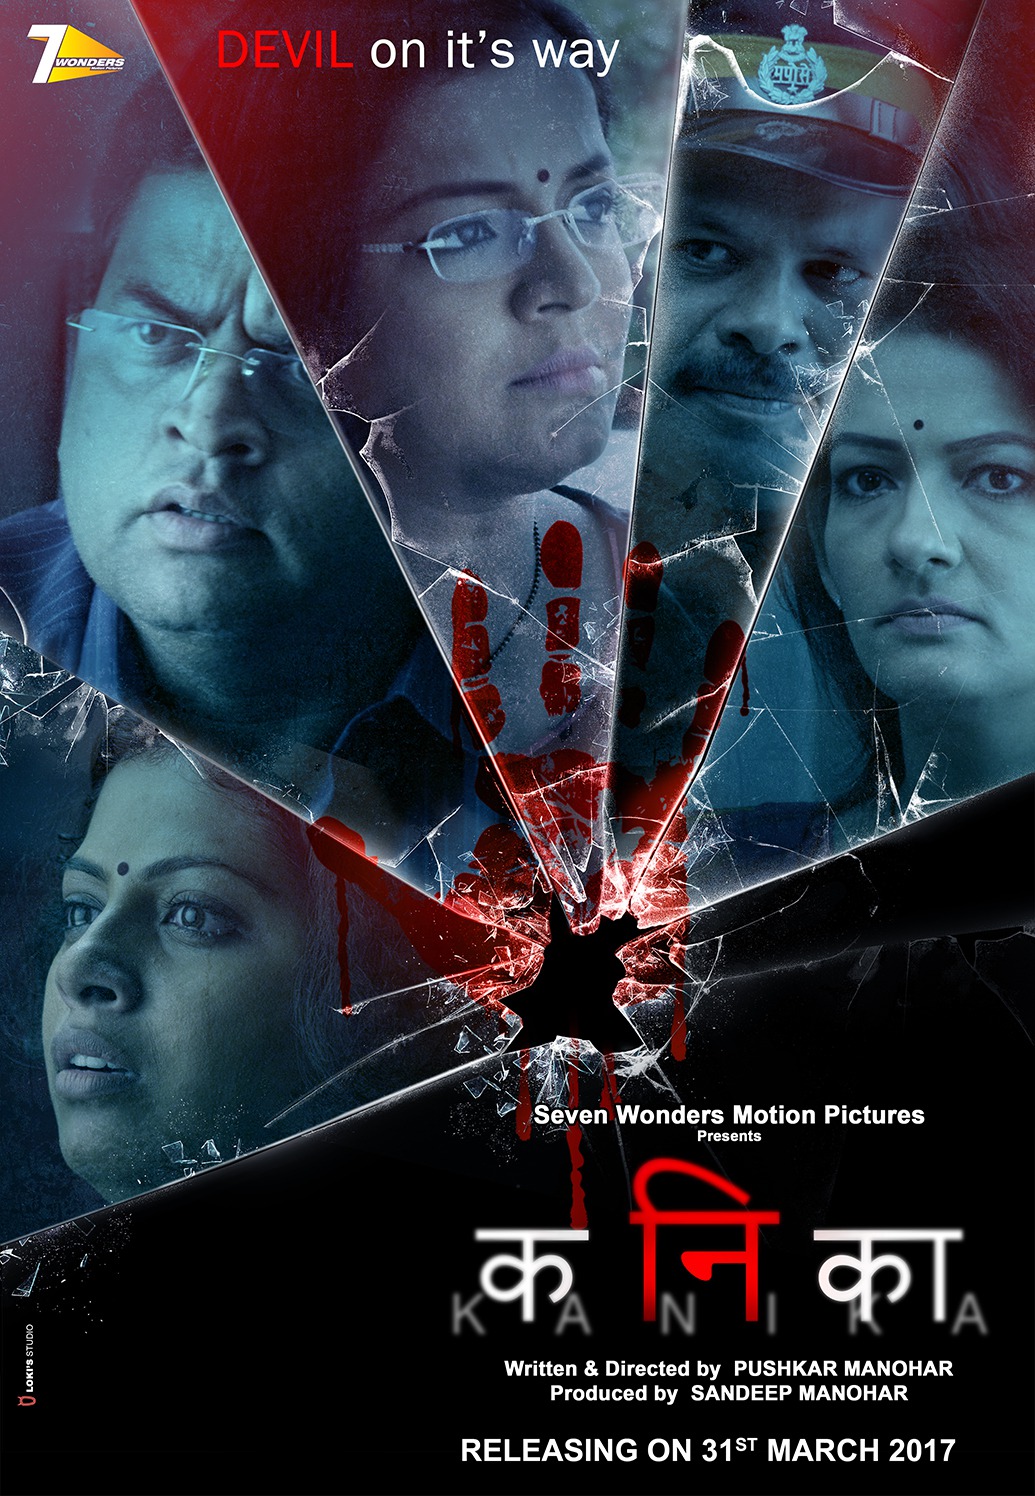 Extra Large Movie Poster Image for Kanika (#7 of 12)